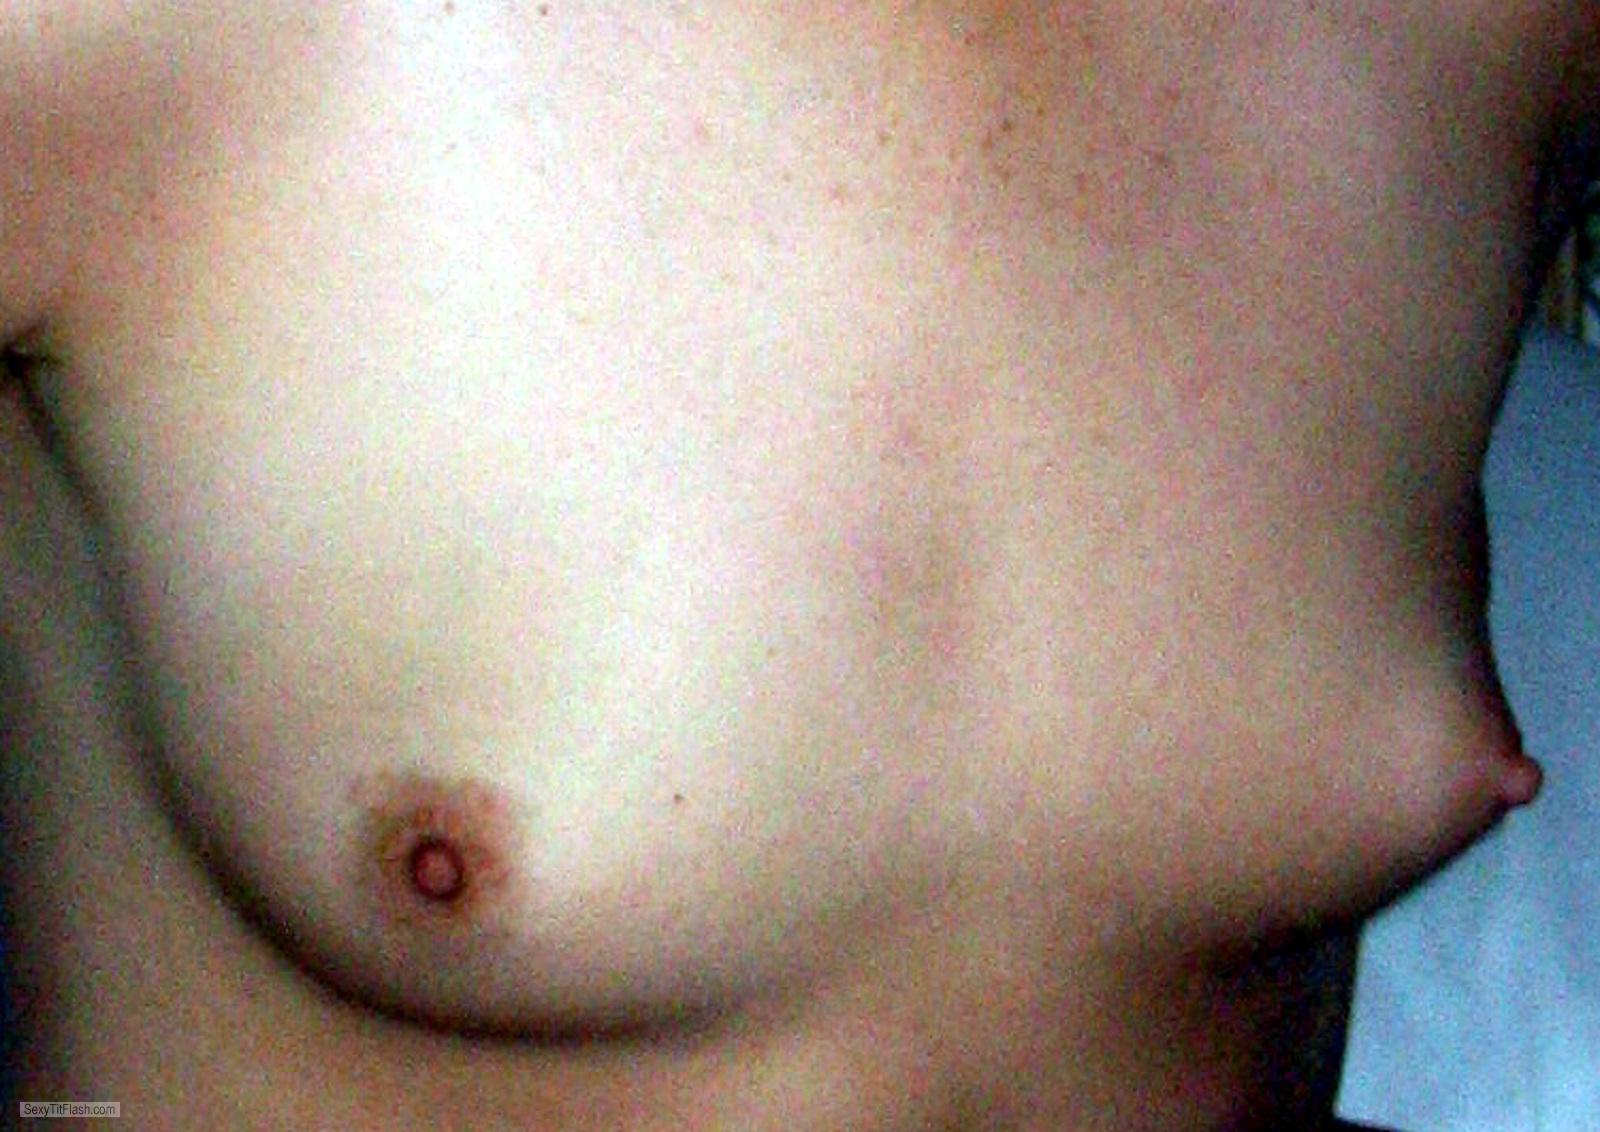 Tit Flash: Room Mate's Very Small Tits - Mspurple from United States